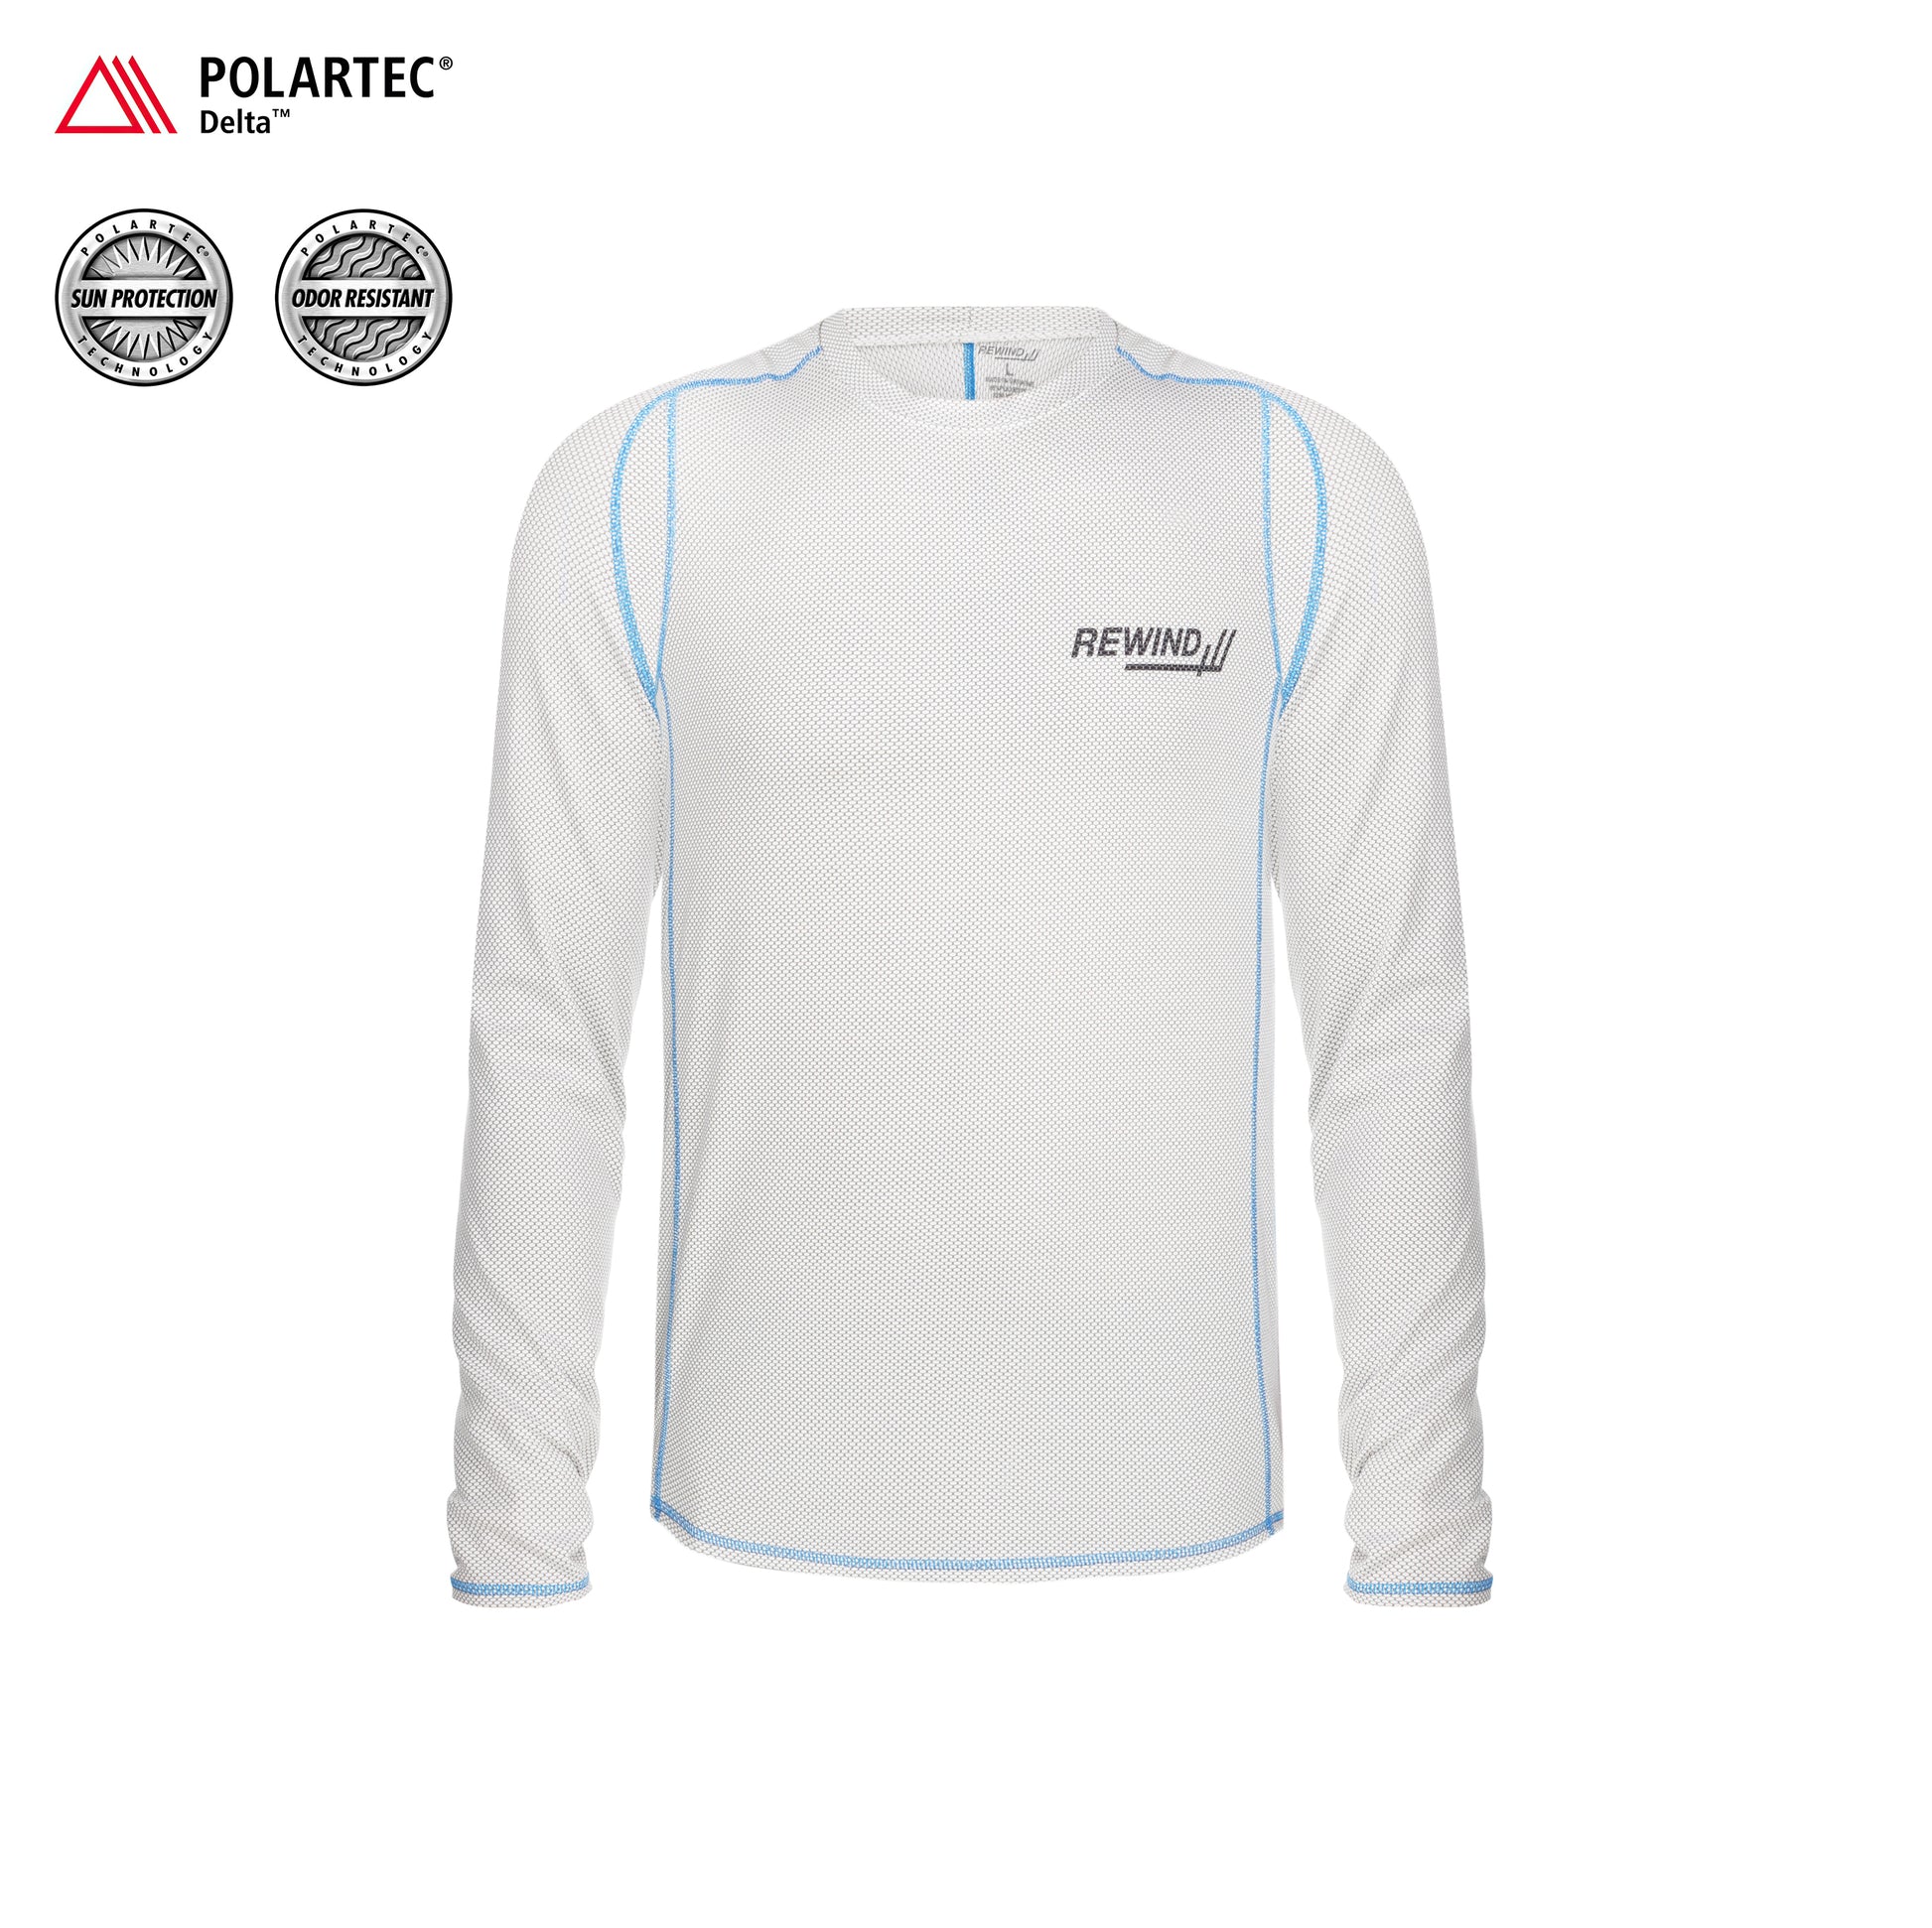 Custom design cooling shirt with long sleeves. REwind - made in Ukraine